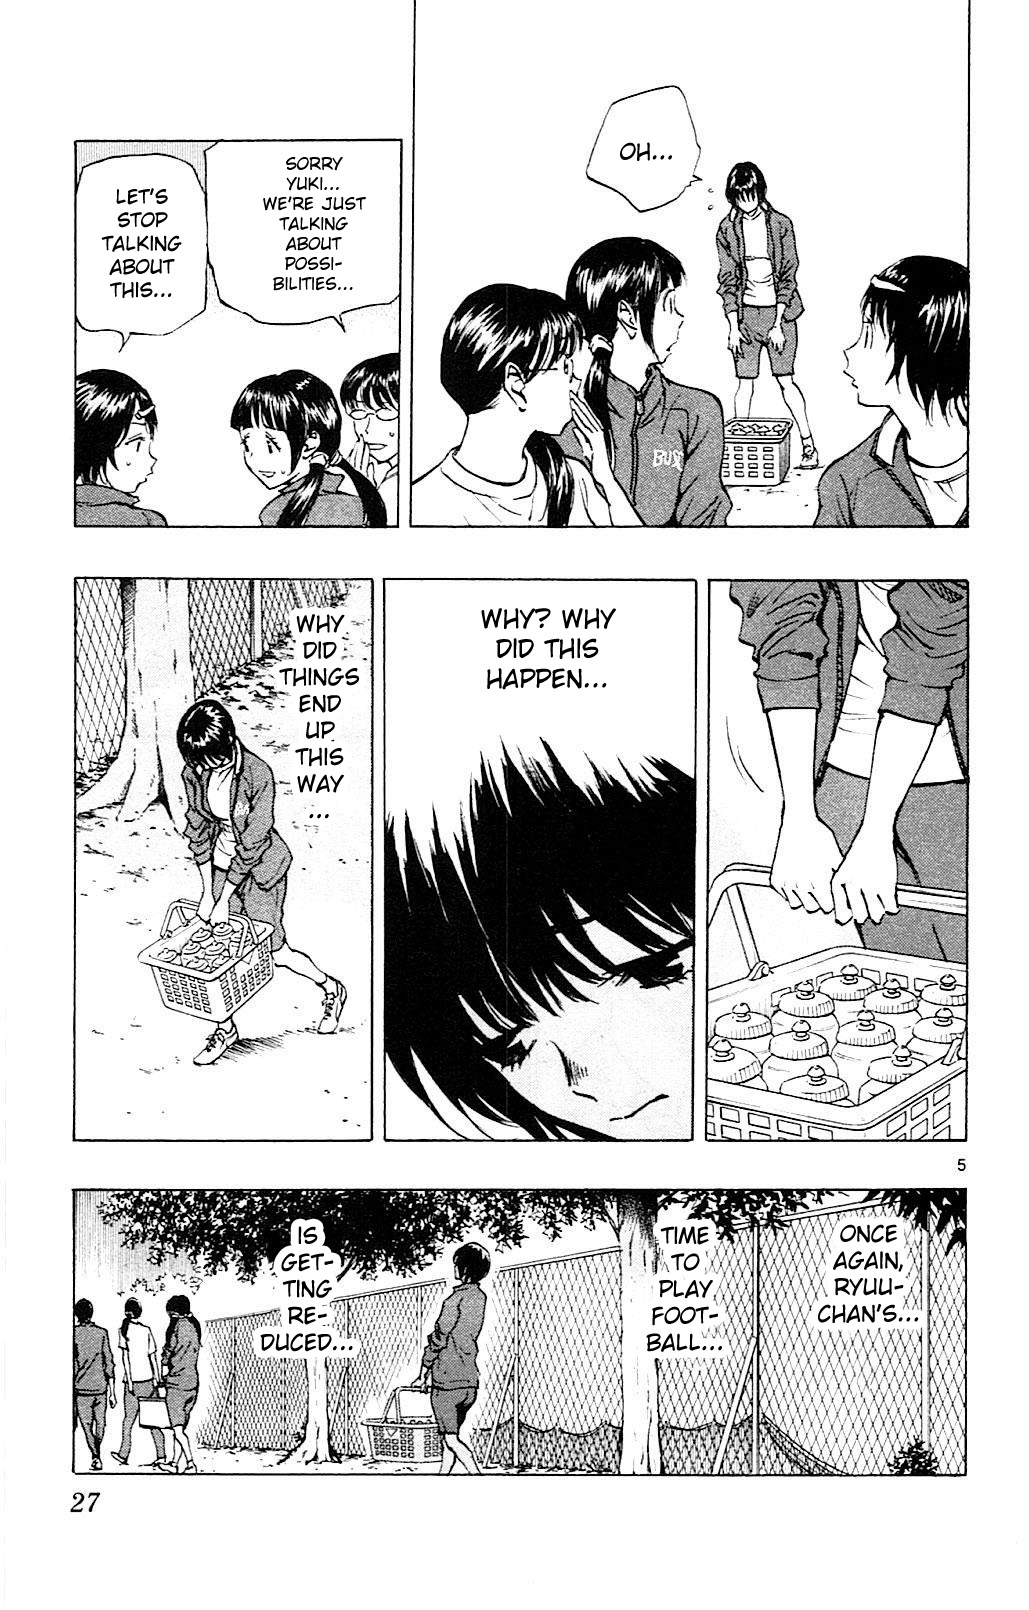 BE BLUES ~Ao ni nare~ Vol. 12 Ch. 109 On the Other Side of the Bank...